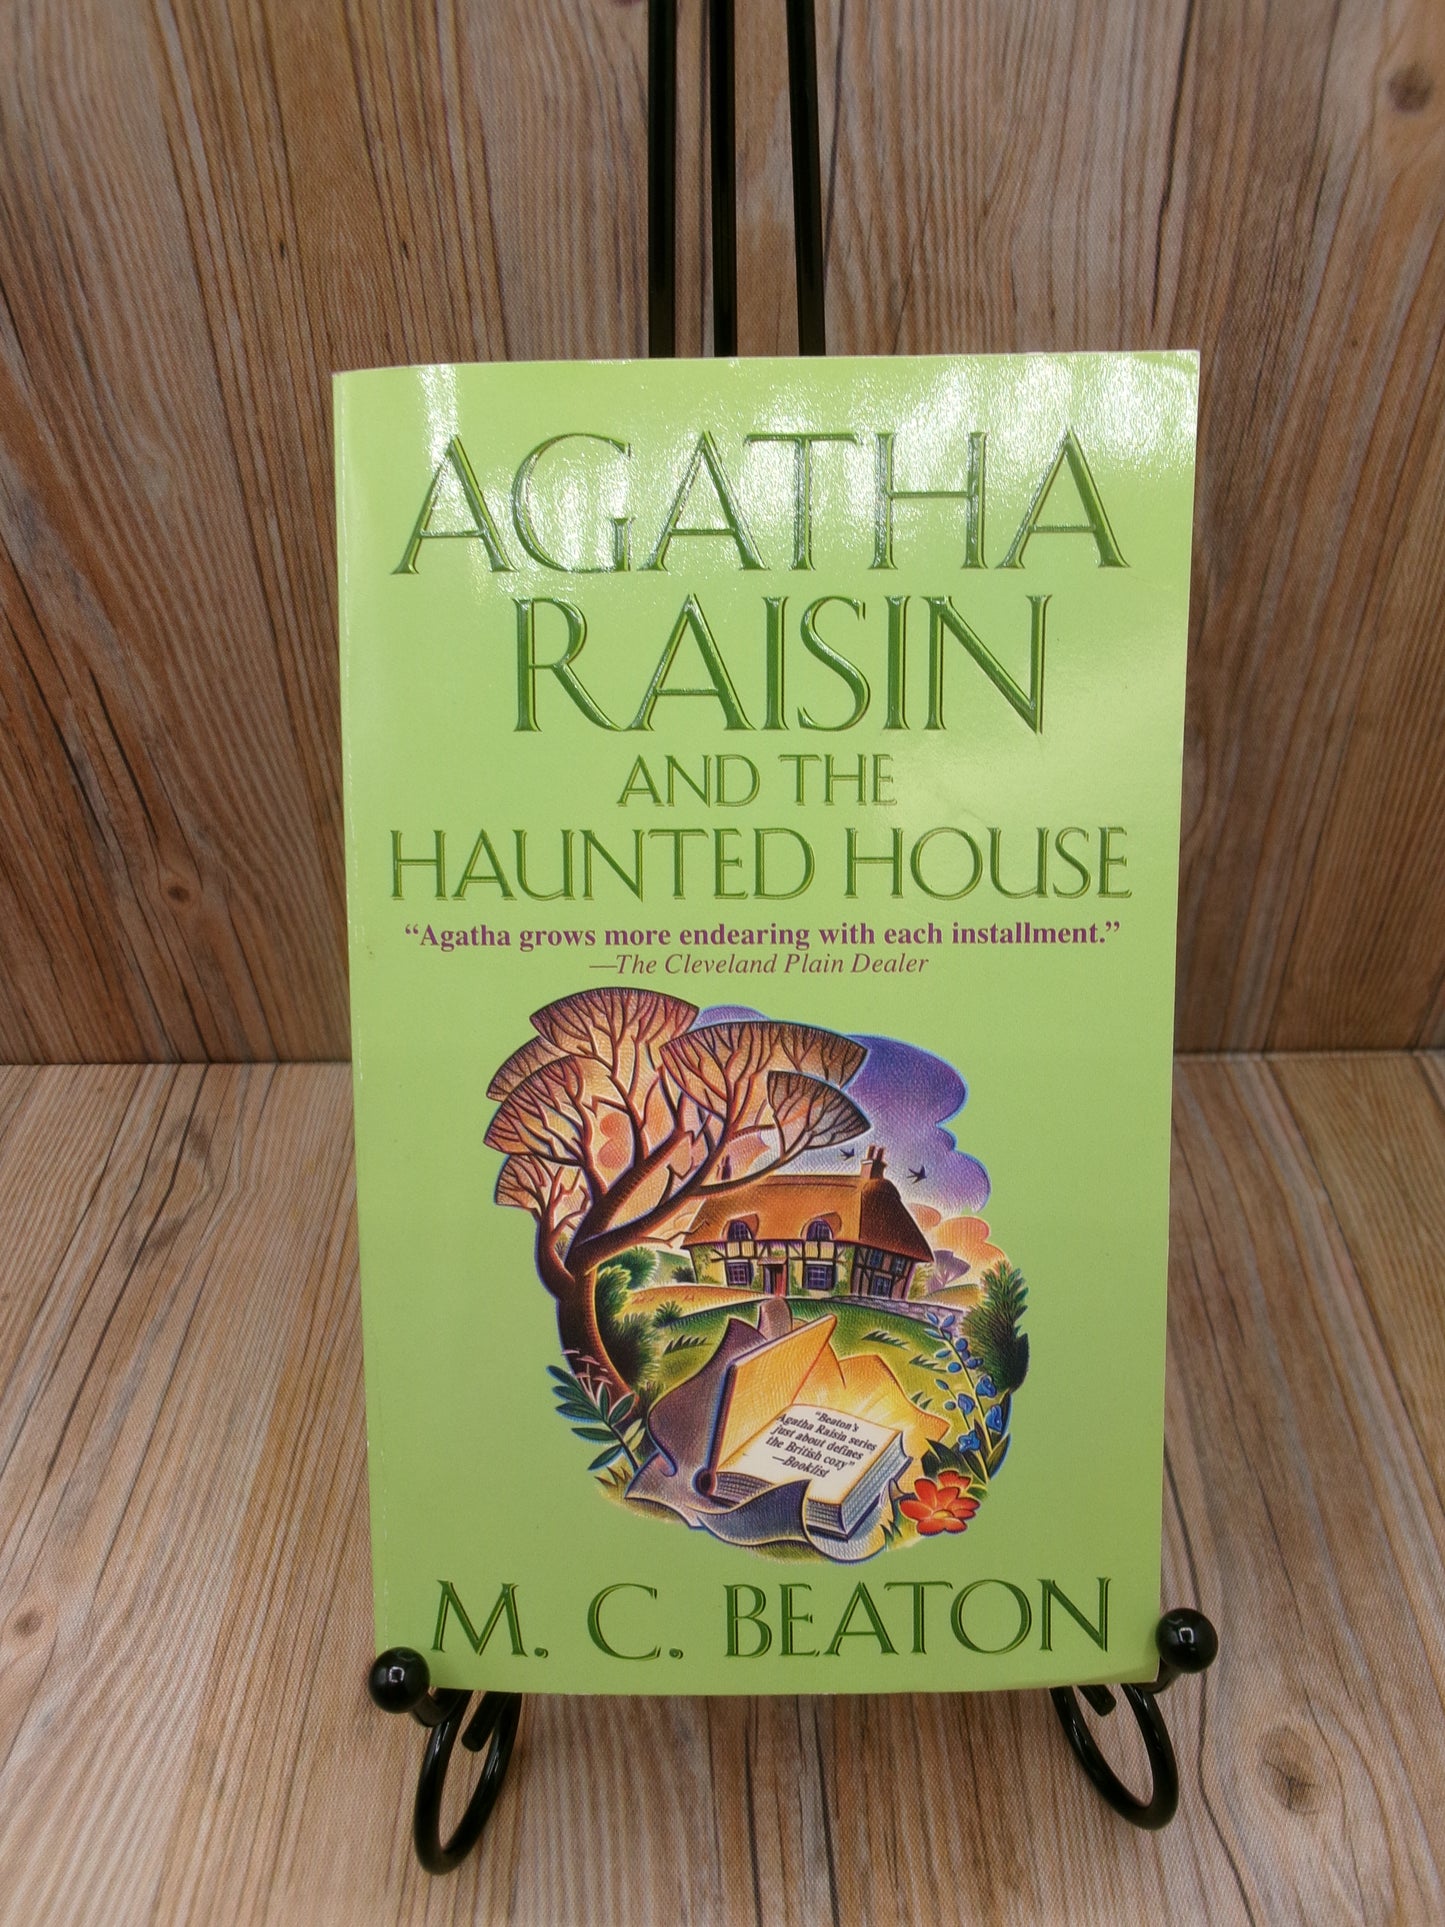 Agatha Raisin and The Haunted House by M.C. Beaton